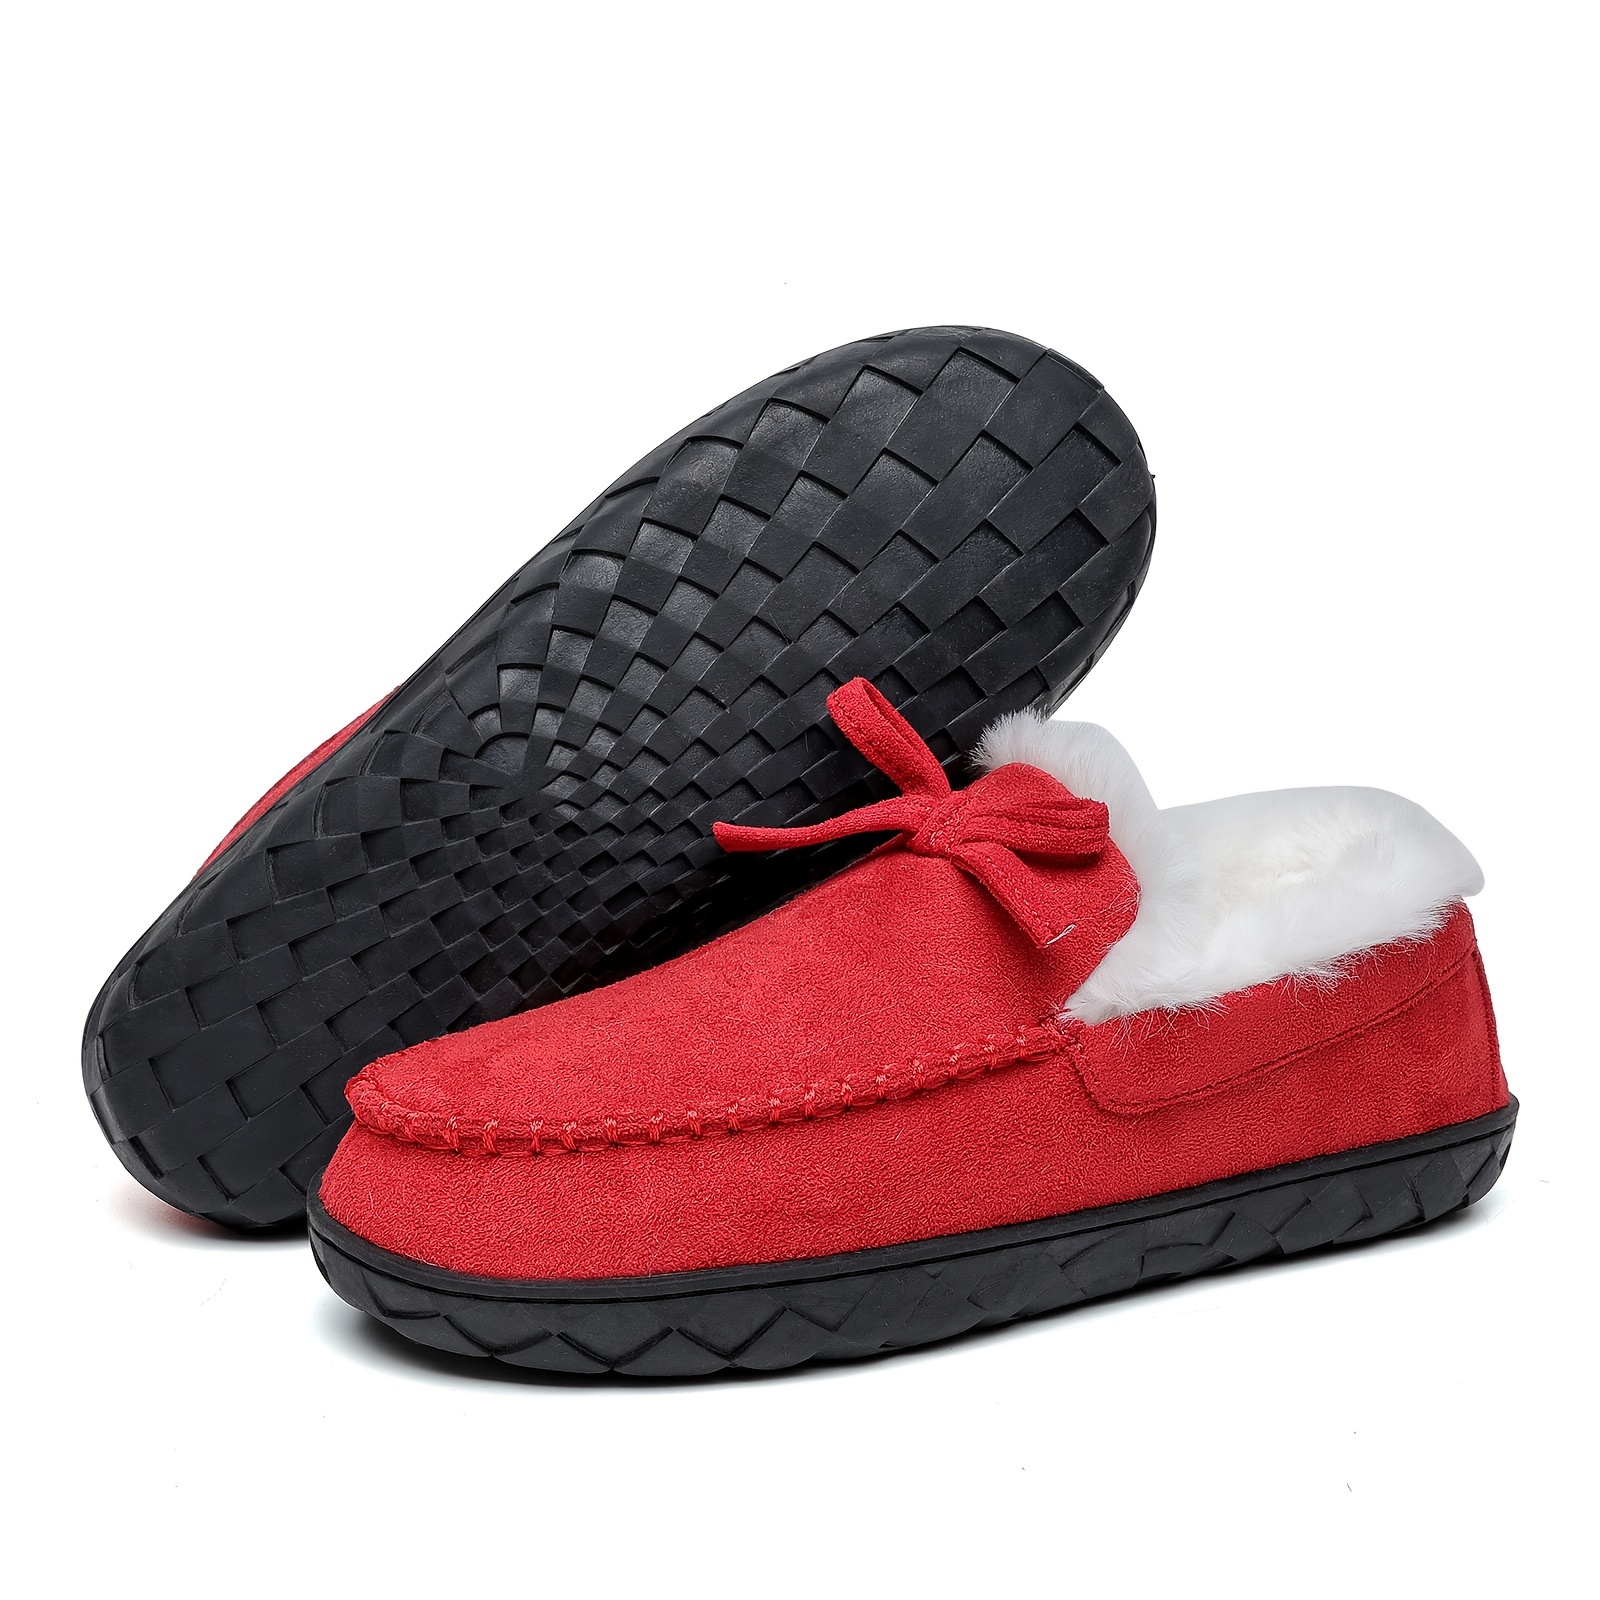 warm slippers solid color casual slip plush lined shoes